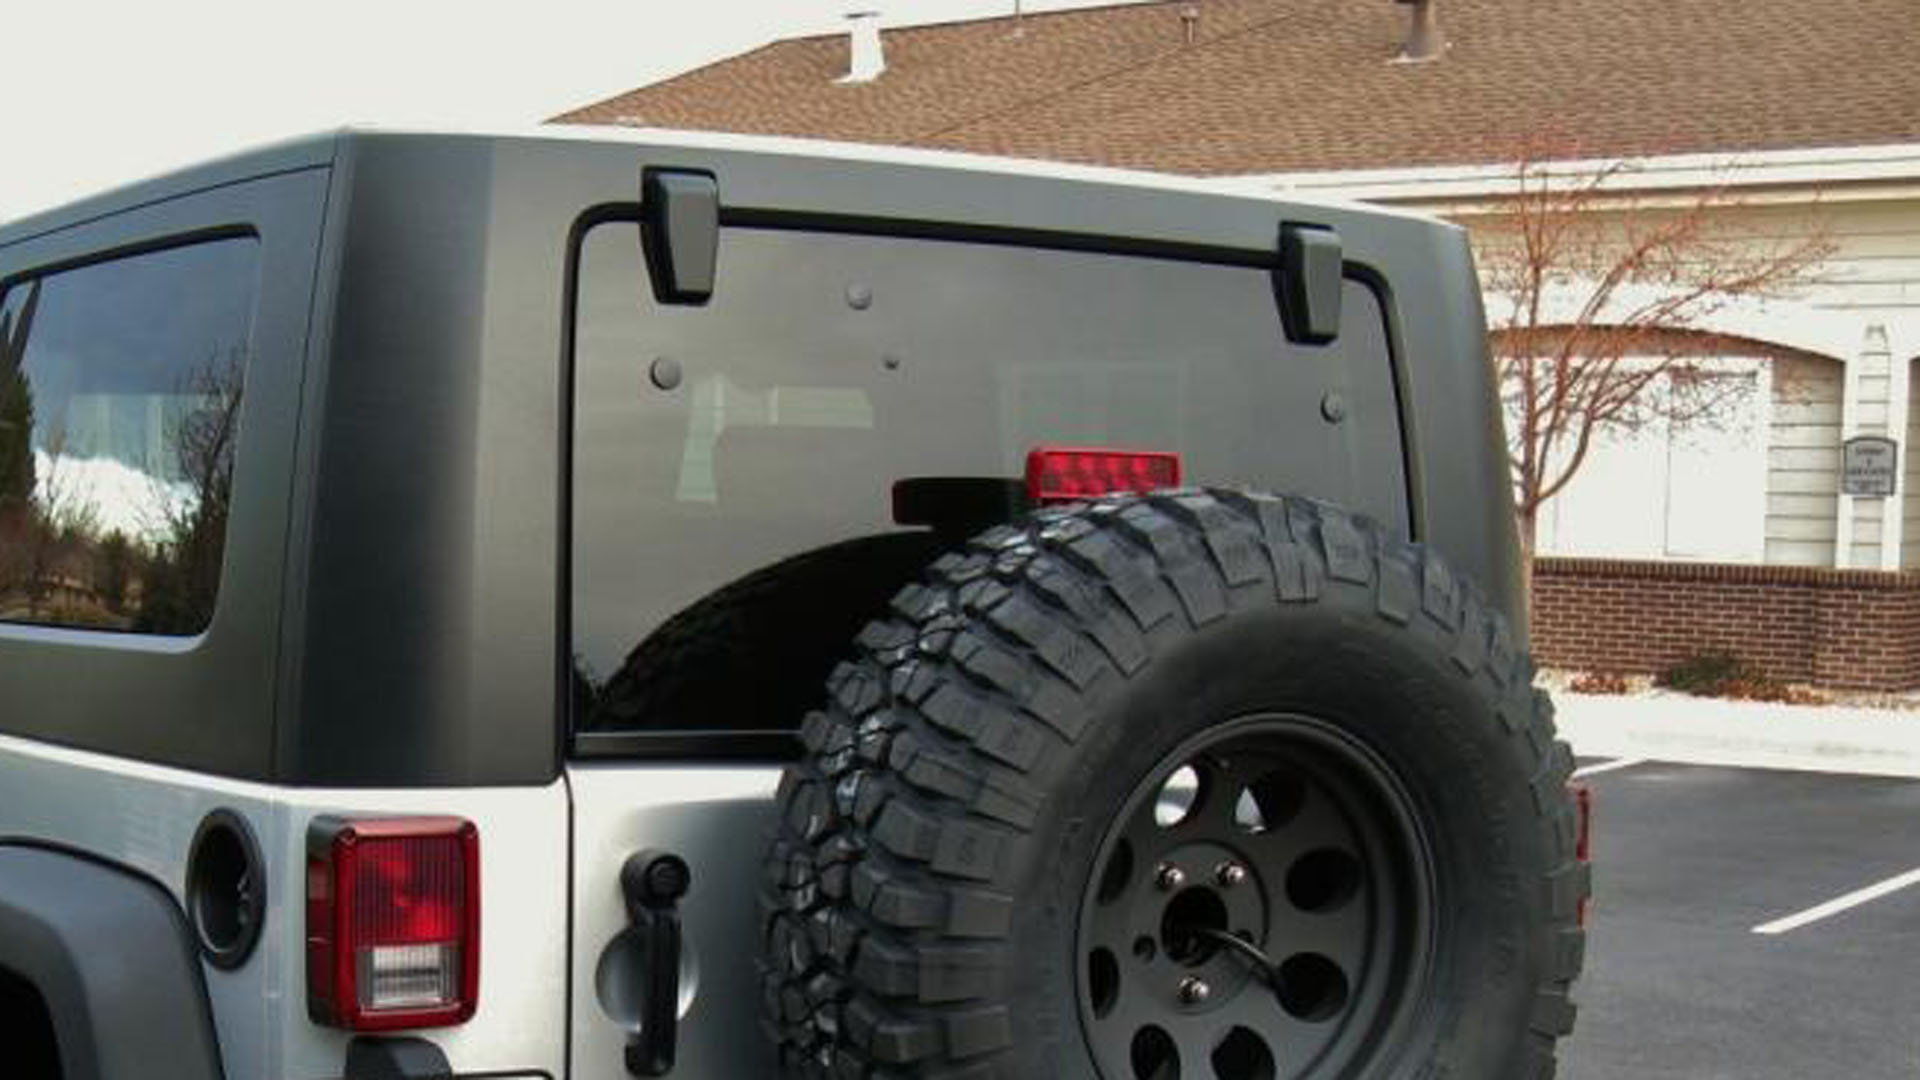 Jeep Wrangler JK: How to Remove/Replace Rear Wiper Assembly | Jk-forum